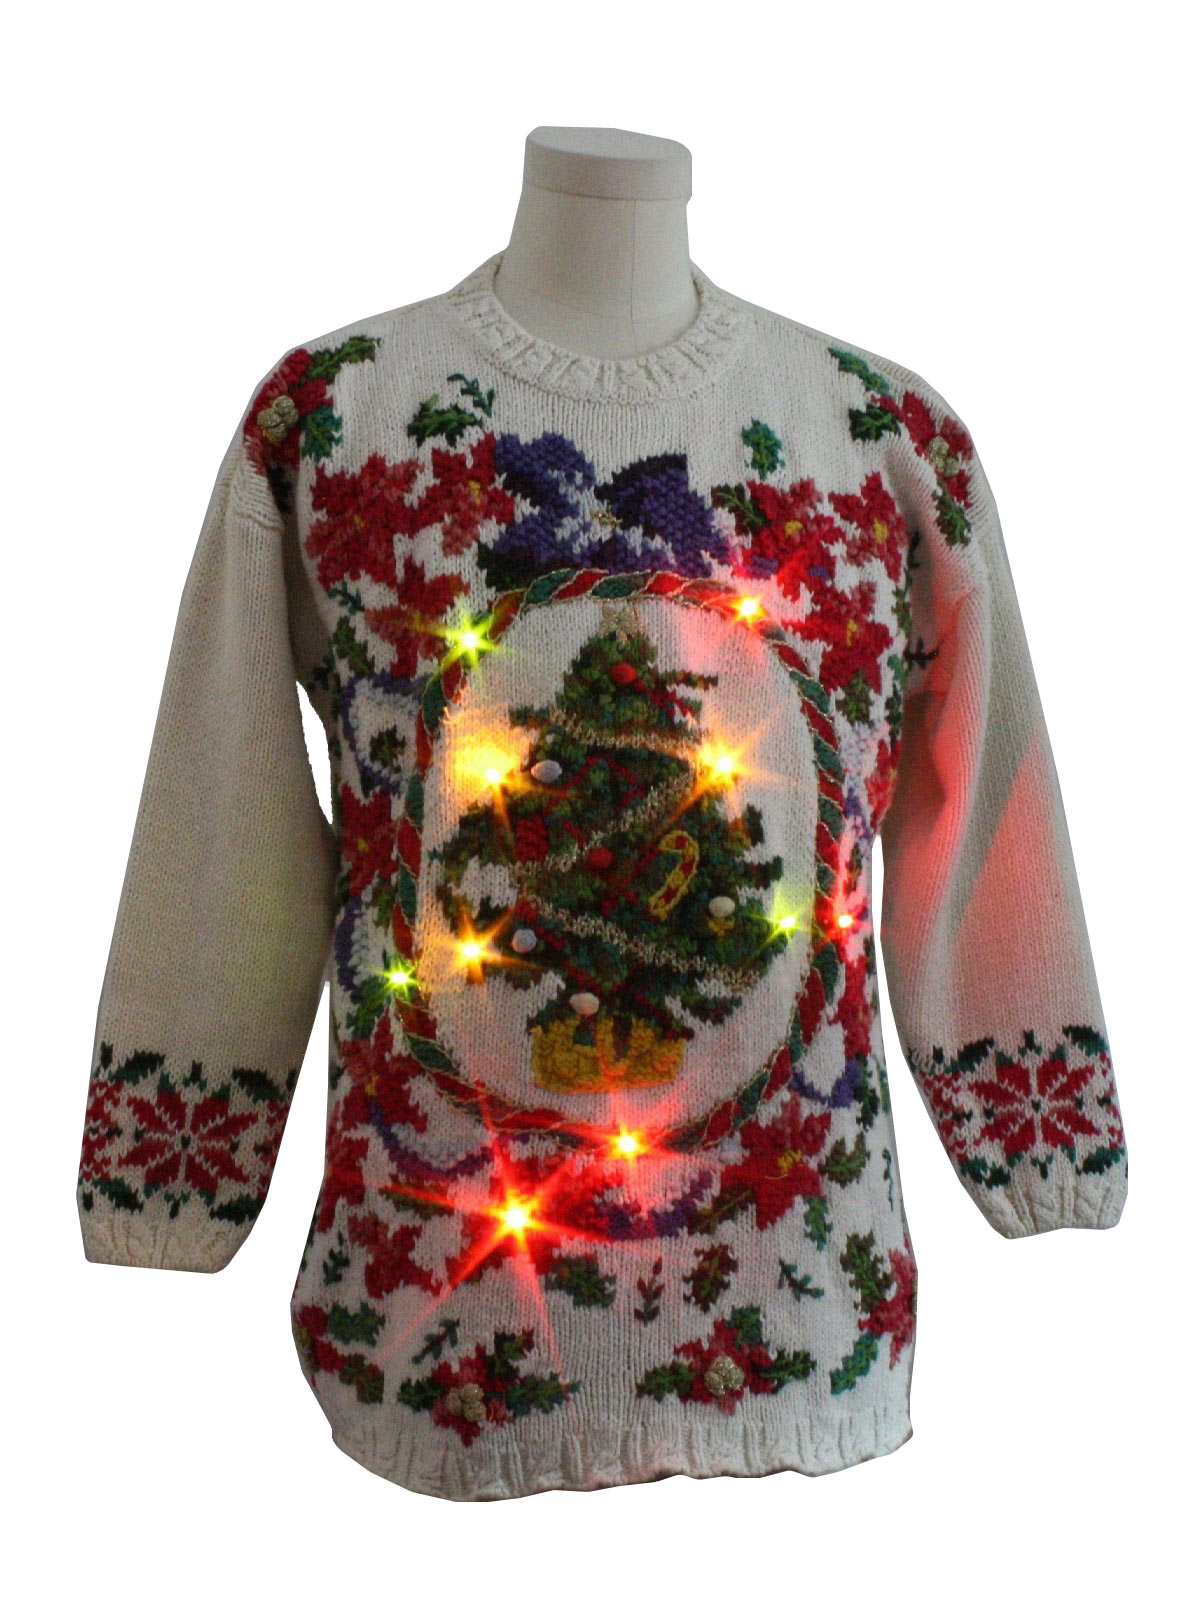 Womens Lightup Ugly Christmas Sweater : -Honors- Womens white ...